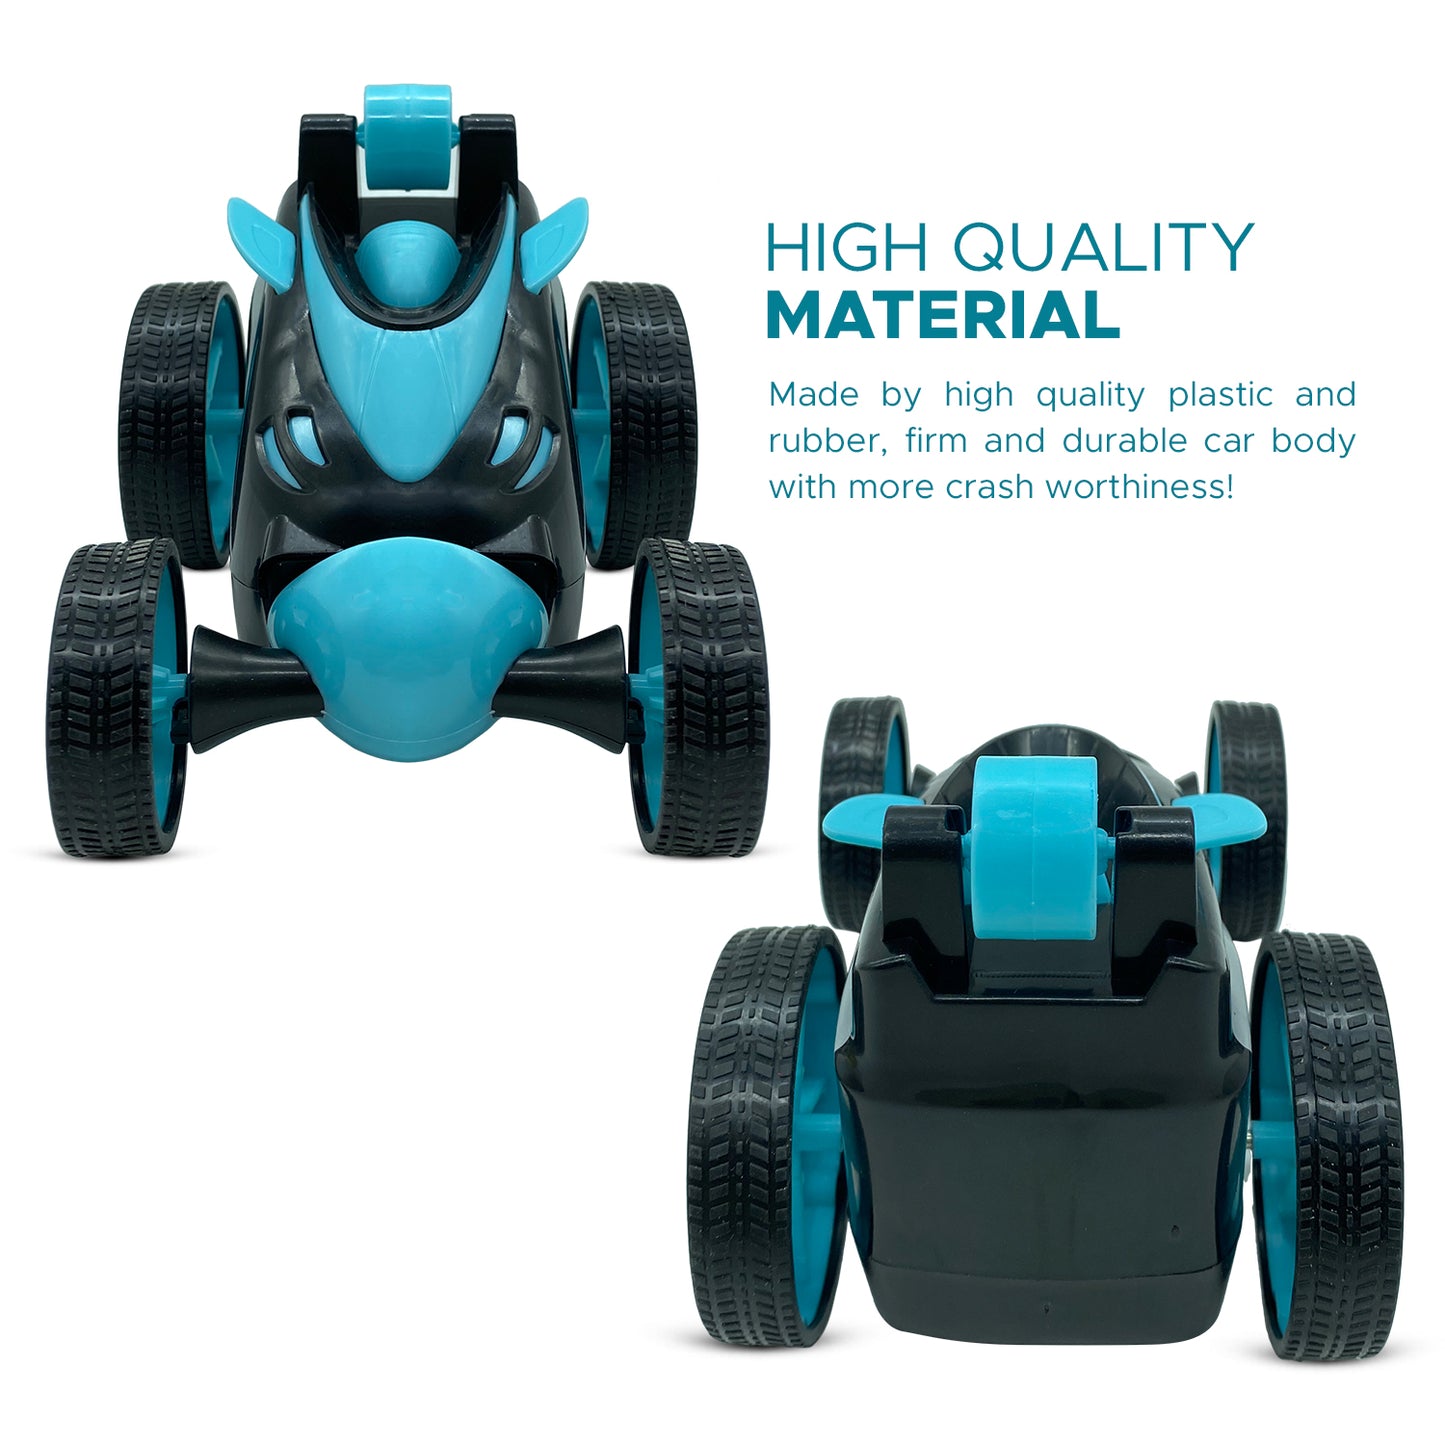 NHR Remote Control Car RC Stunt 360° Rotating Rolling Control Electric Race Car Kids- 3+ Years (Choose any color)